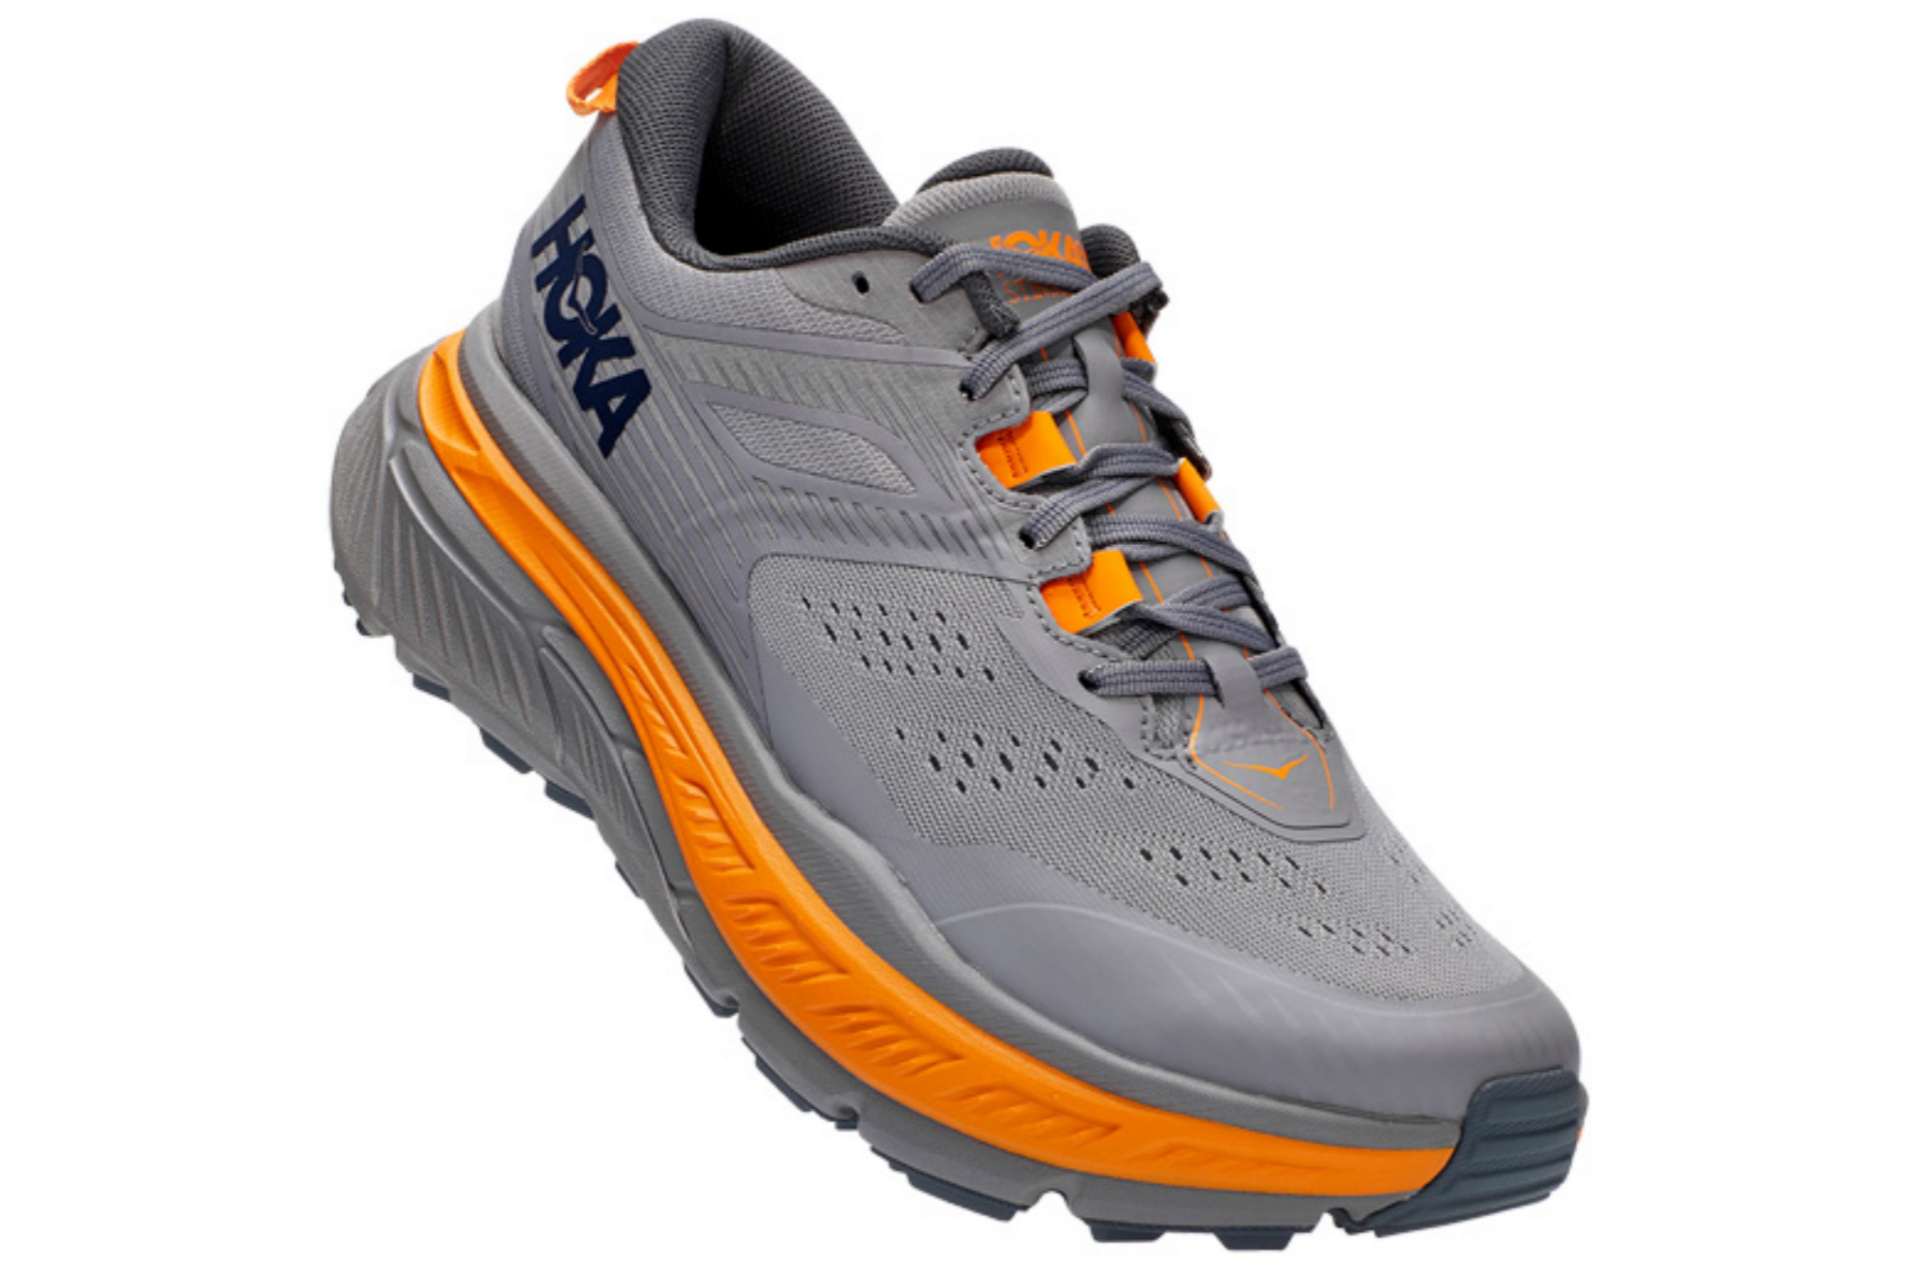 Best Hoka One One Shoes for Plantar Fasciitis